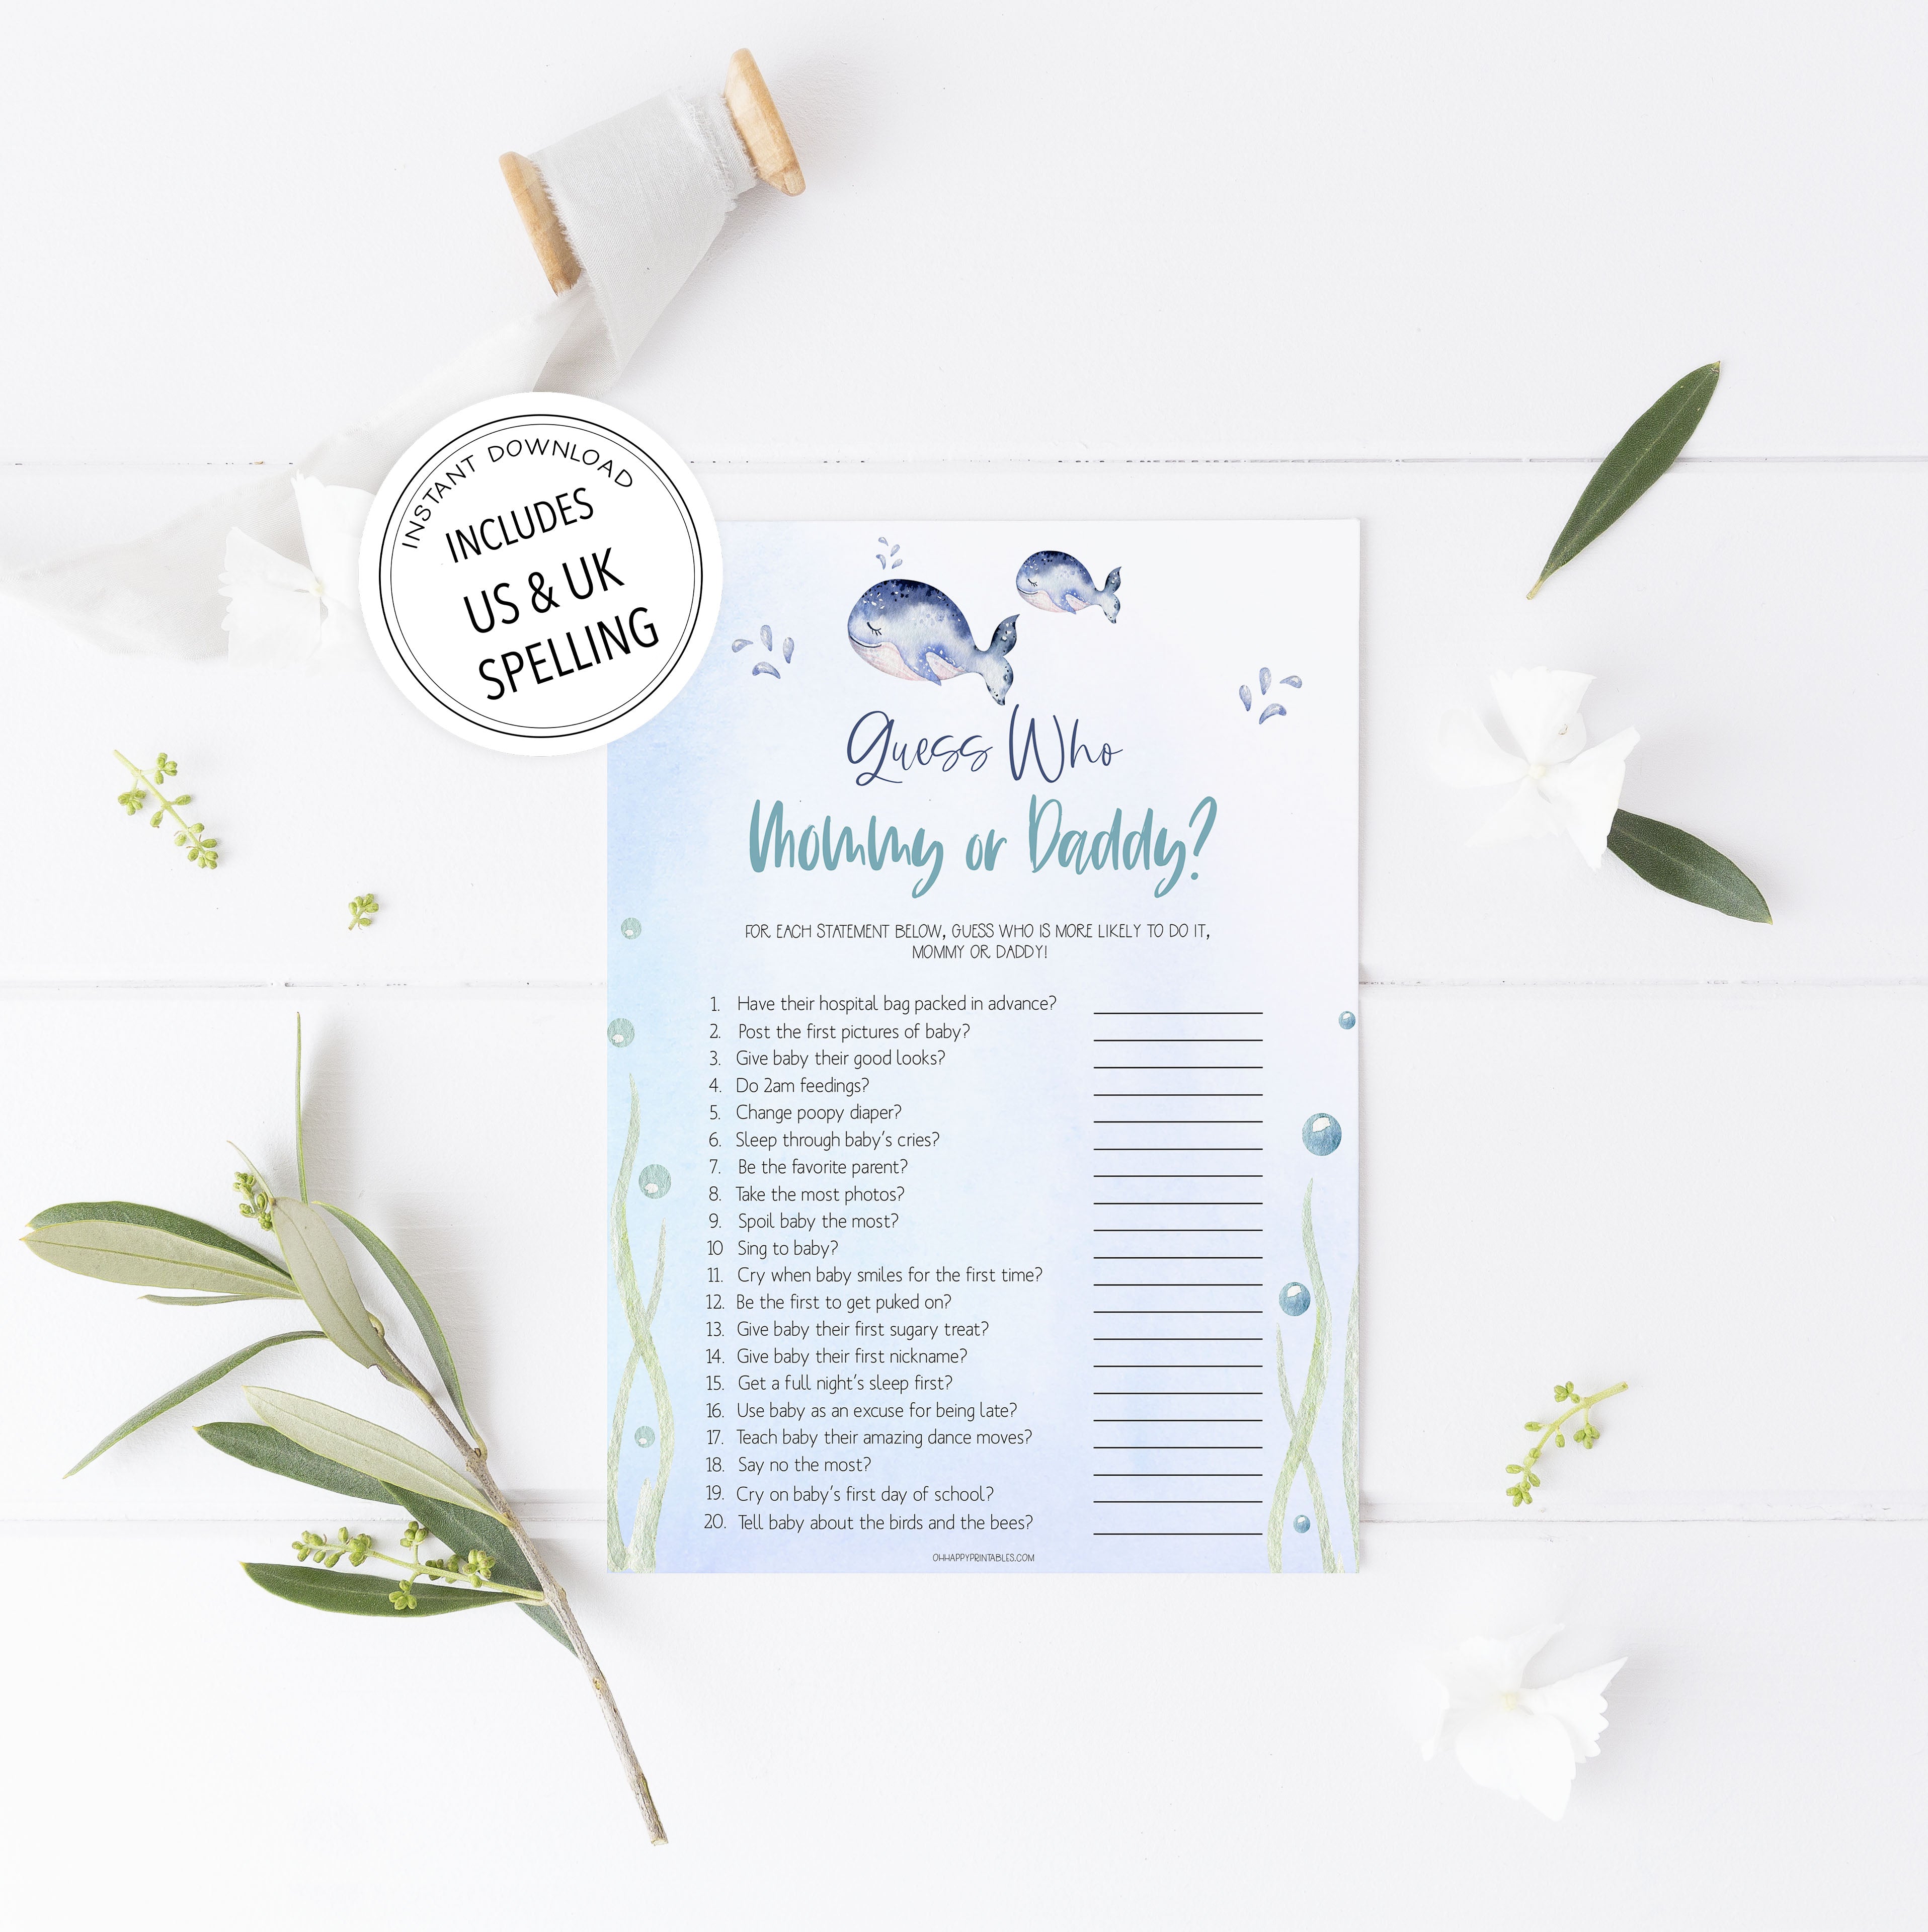 guess who baby shower games, Printable baby shower games, whale baby games, baby shower games, fun baby shower ideas, top baby shower ideas, whale baby shower, baby shower games, fun whale baby shower ideas